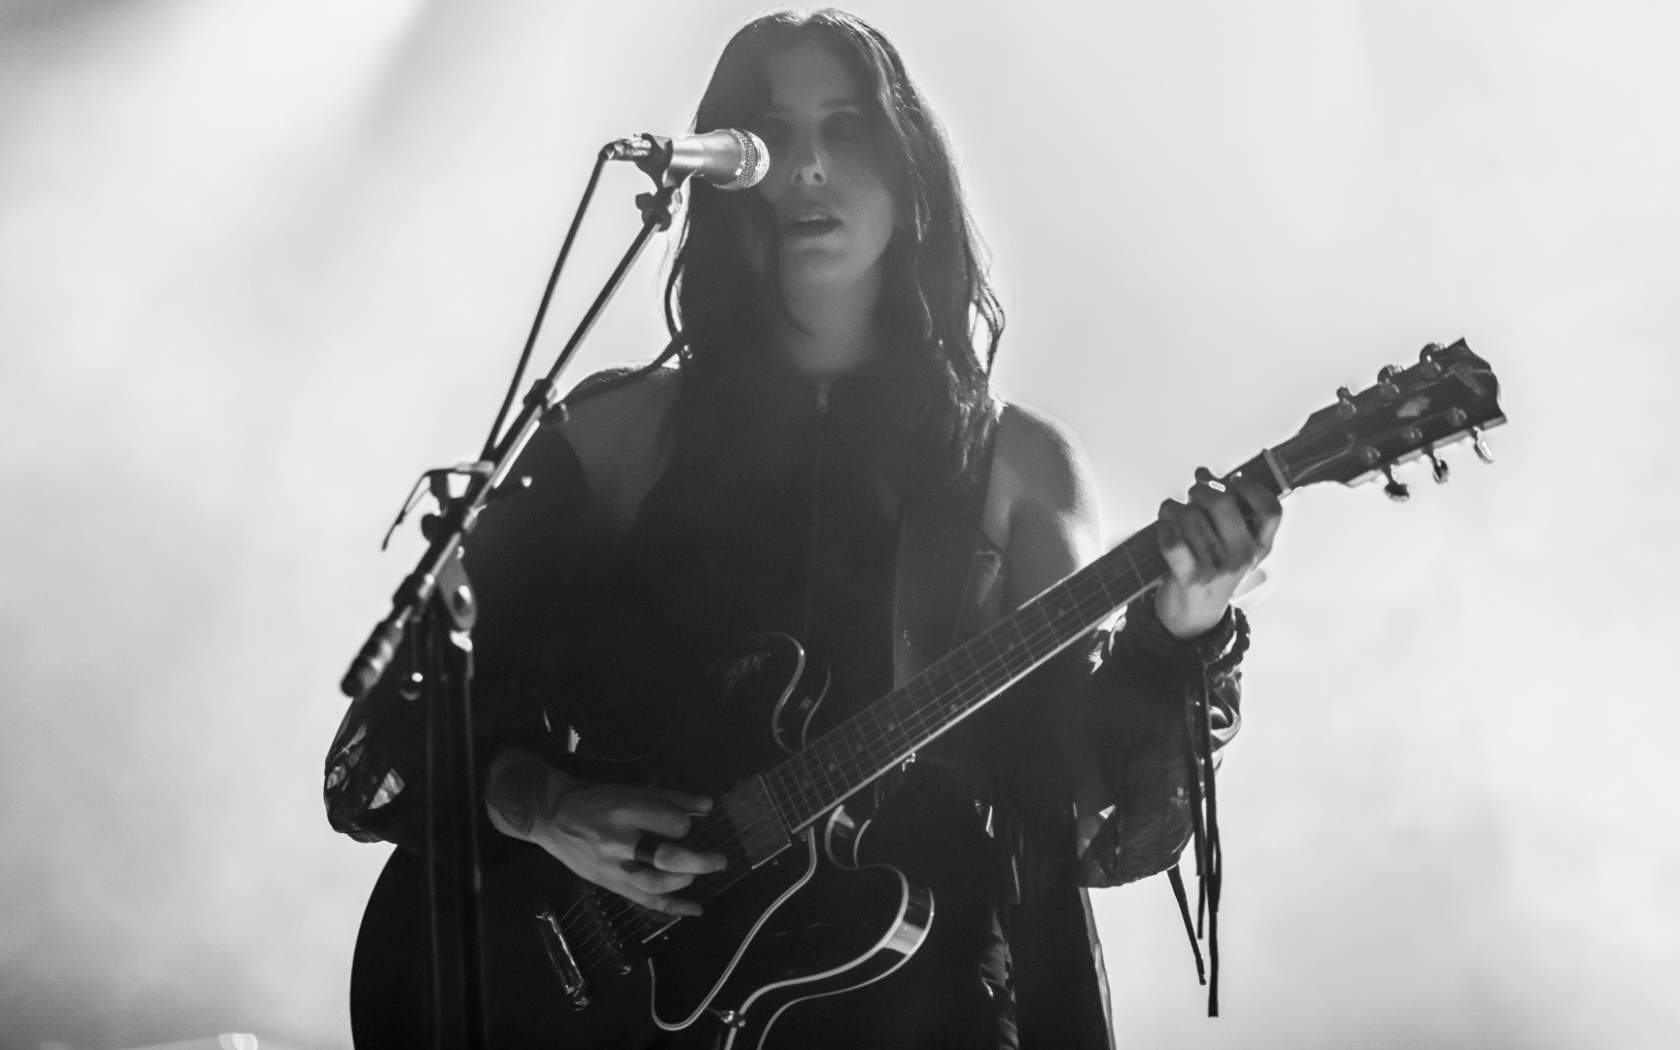 Singer Chelsea Wolfe at the microphone